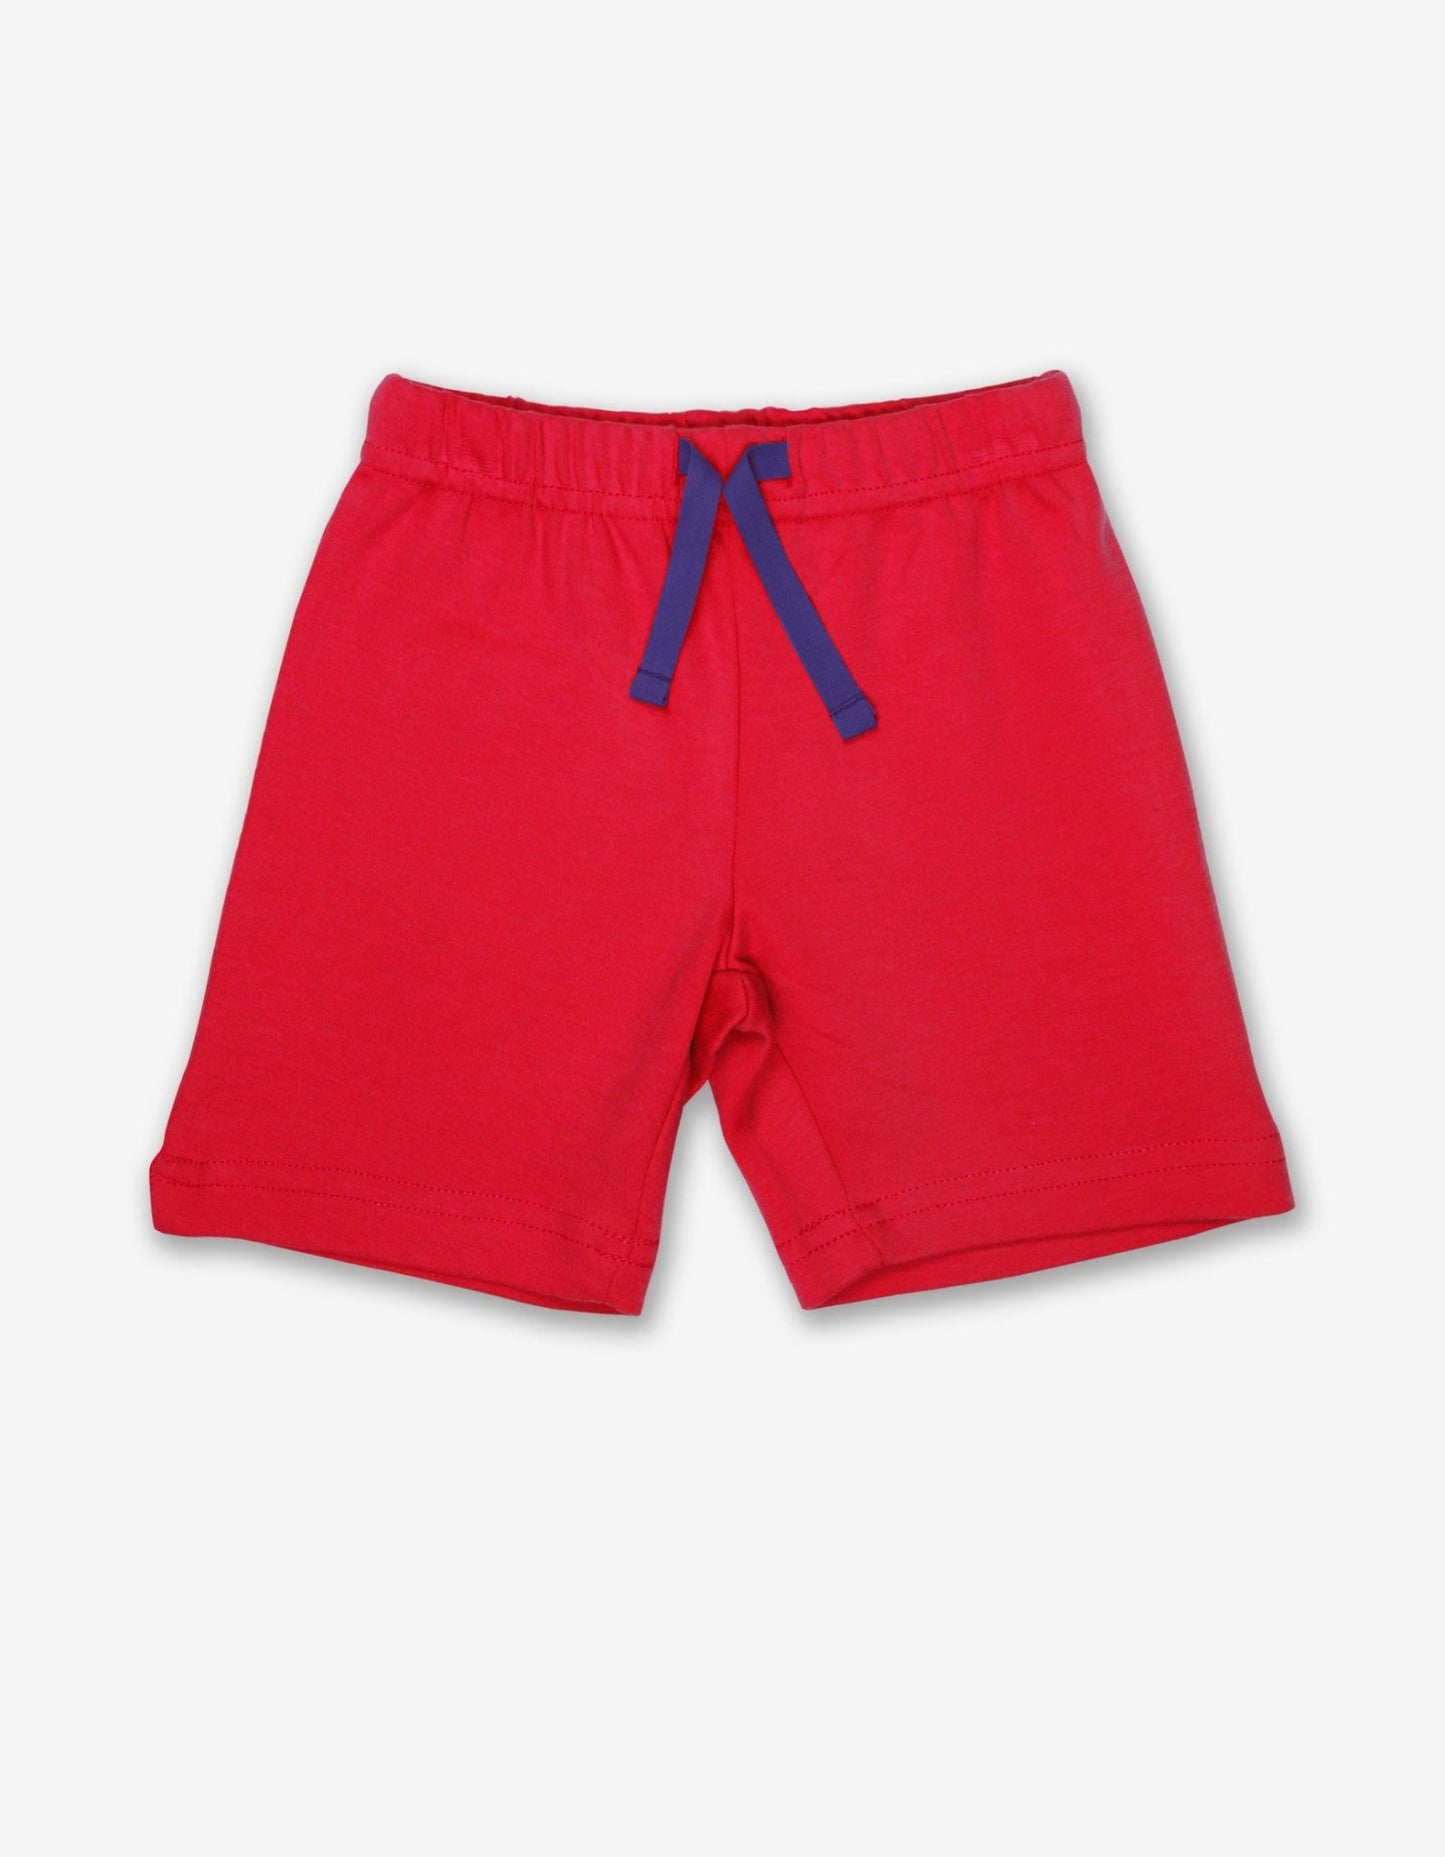 Organic Red Shorts - Toby Tiger